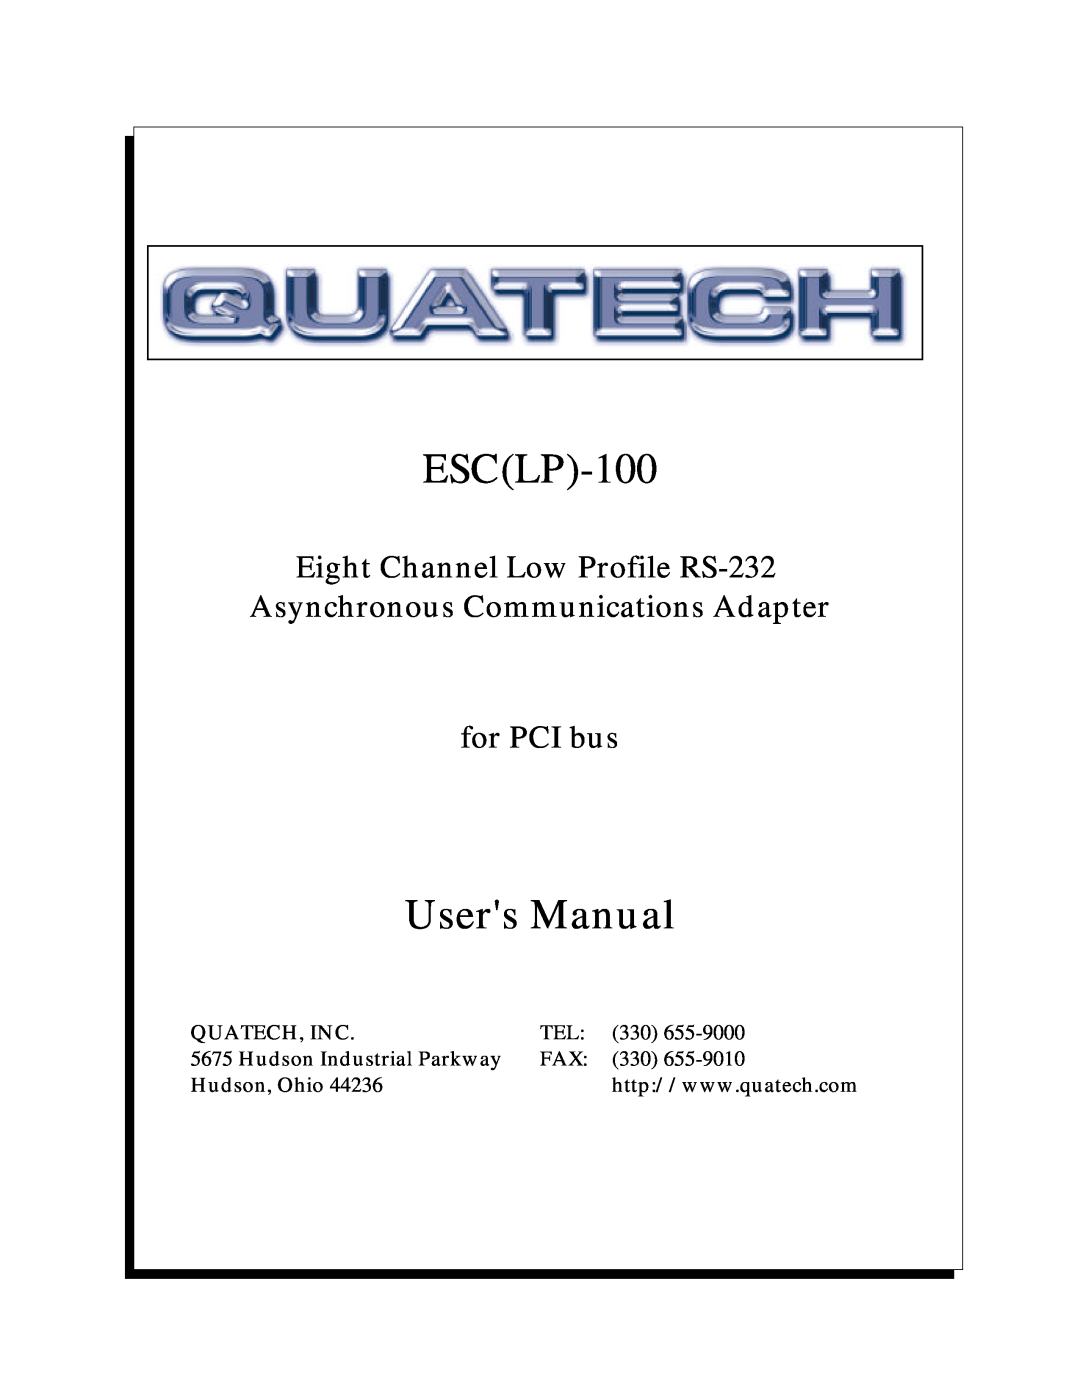 Quatech user manual ESCLP-100, Users Manual, Eight Channel Low Profile RS-232 Asynchronous Communications Adapter 